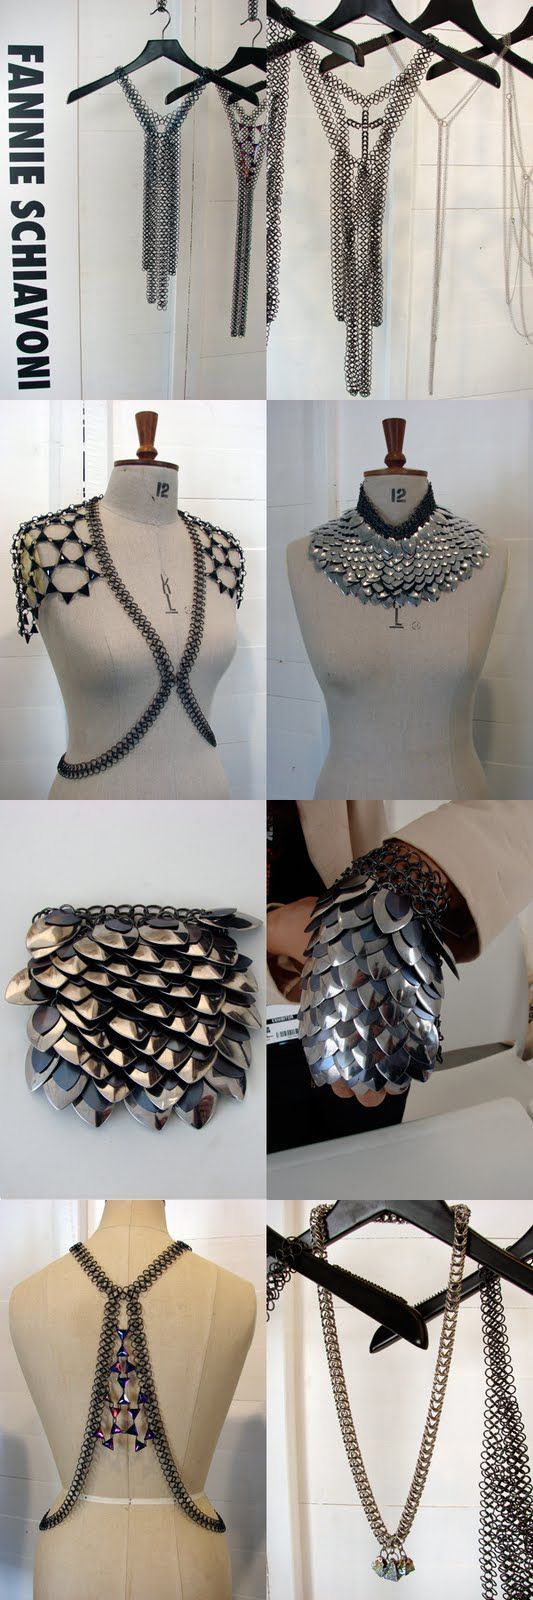 A Matter Of Style: DIY Fashion: The urban warrior:Armor jewelry Does anyone else think of Return to Thunderdome?